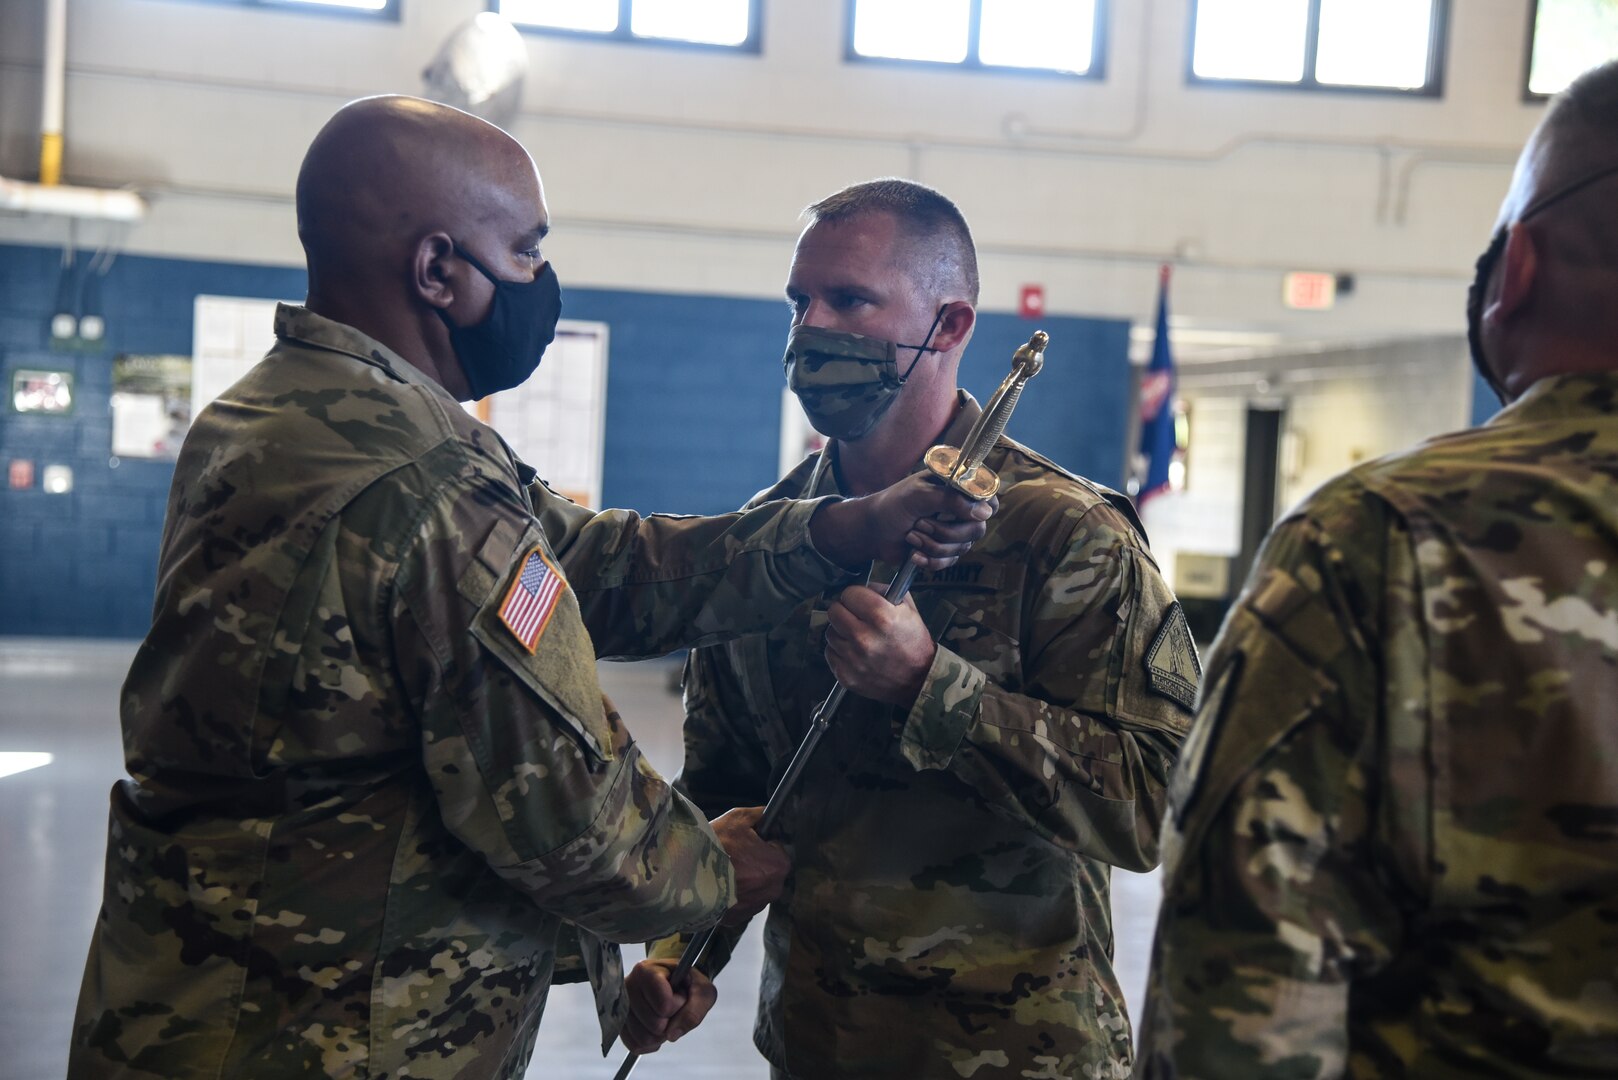 Soldiers assigned to Alpha Company of the Virginia National Guard’s Recruiting and Retention Battalion welcomed a new first sergeant and commander in a ceremony held Oct. 20, 2021 at the armory in South Boston, Virginia. Capt. Michael Eames took command of the company from Capt. Keith Agee, and 1st Sgt. Michael Clay took responsibility of the formation from 1st Sgt. Donnie Brizendine, who recruited Clay into the National Guard 17 years ago. (U.S. Army National Guard photo by Sgt. 1st Class Terra C. Gatti)